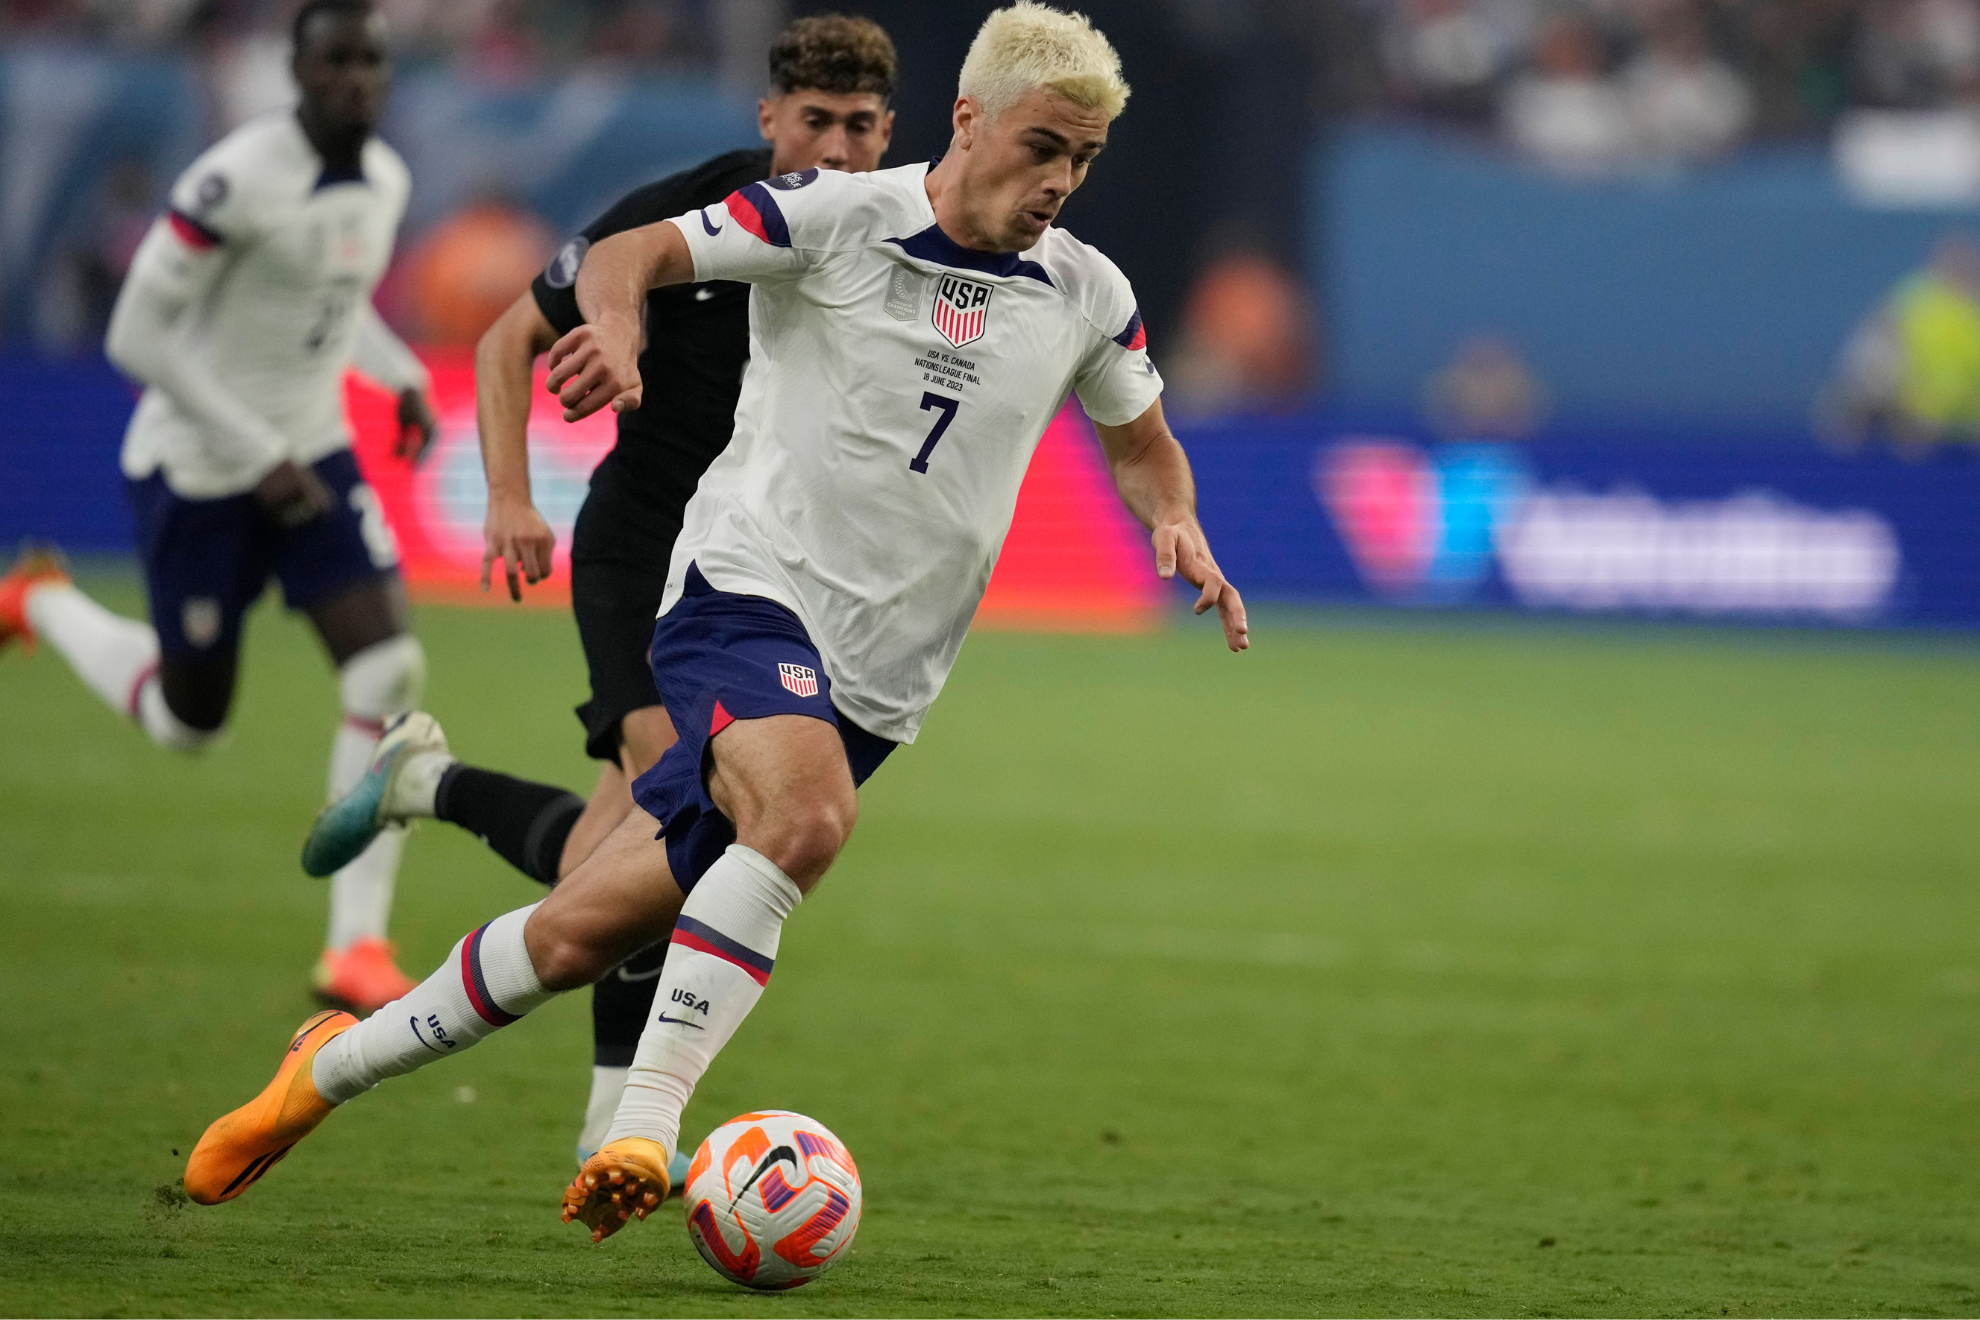 Reyna is coming off a brilliant 45-minute performance in the CONCACAF Nations League final.